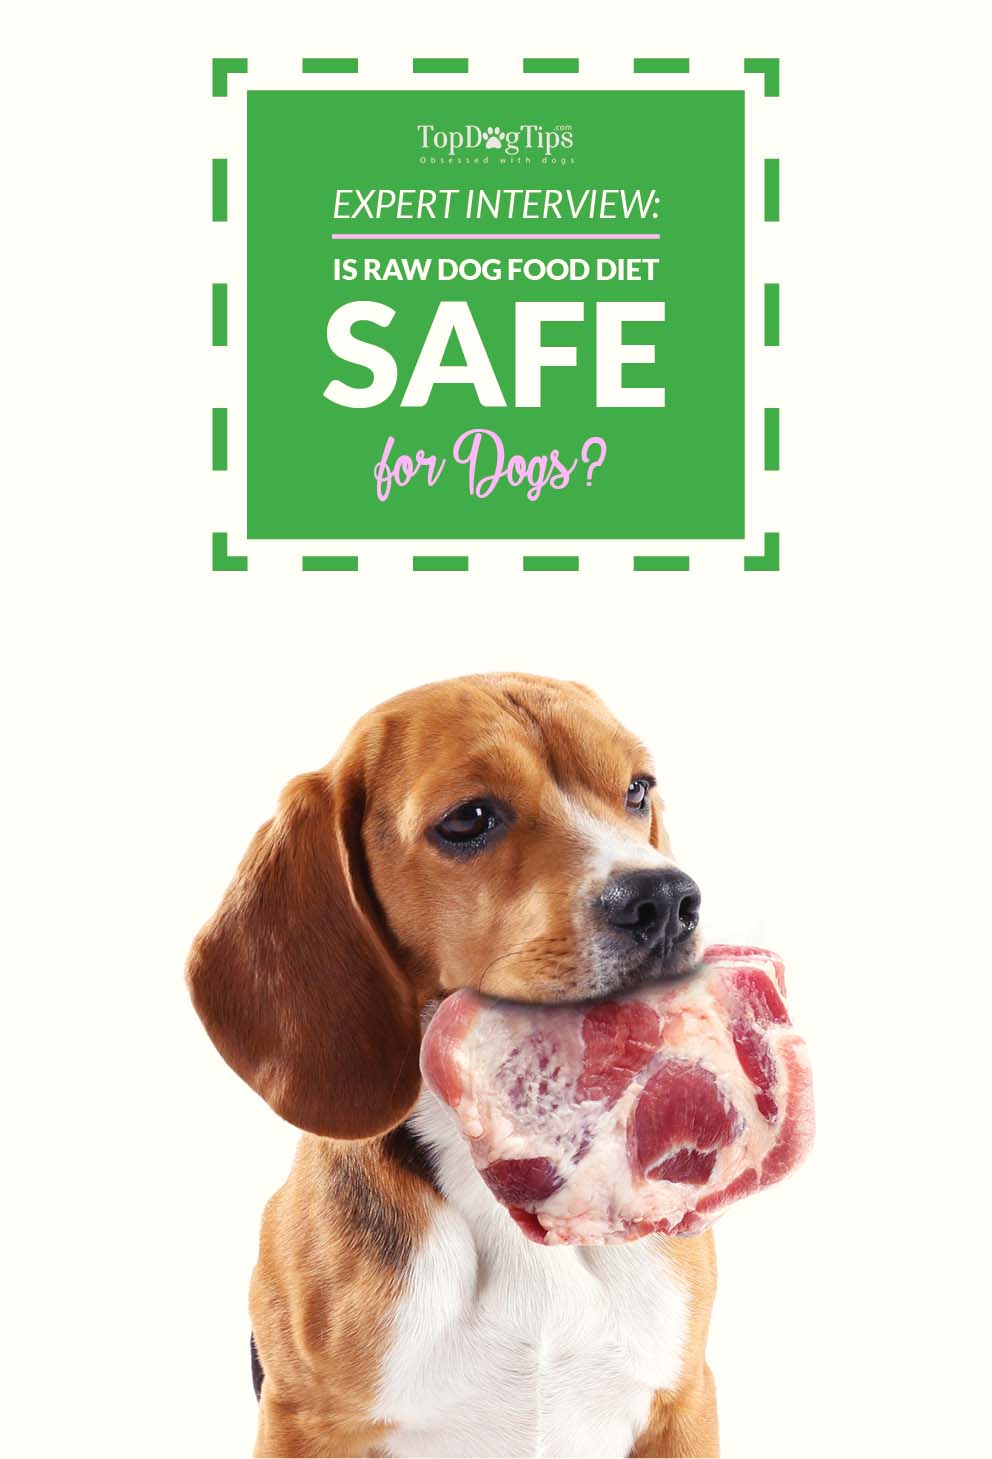 Expert Interview: Is Raw Dog Food Diet Safe for Dogs?